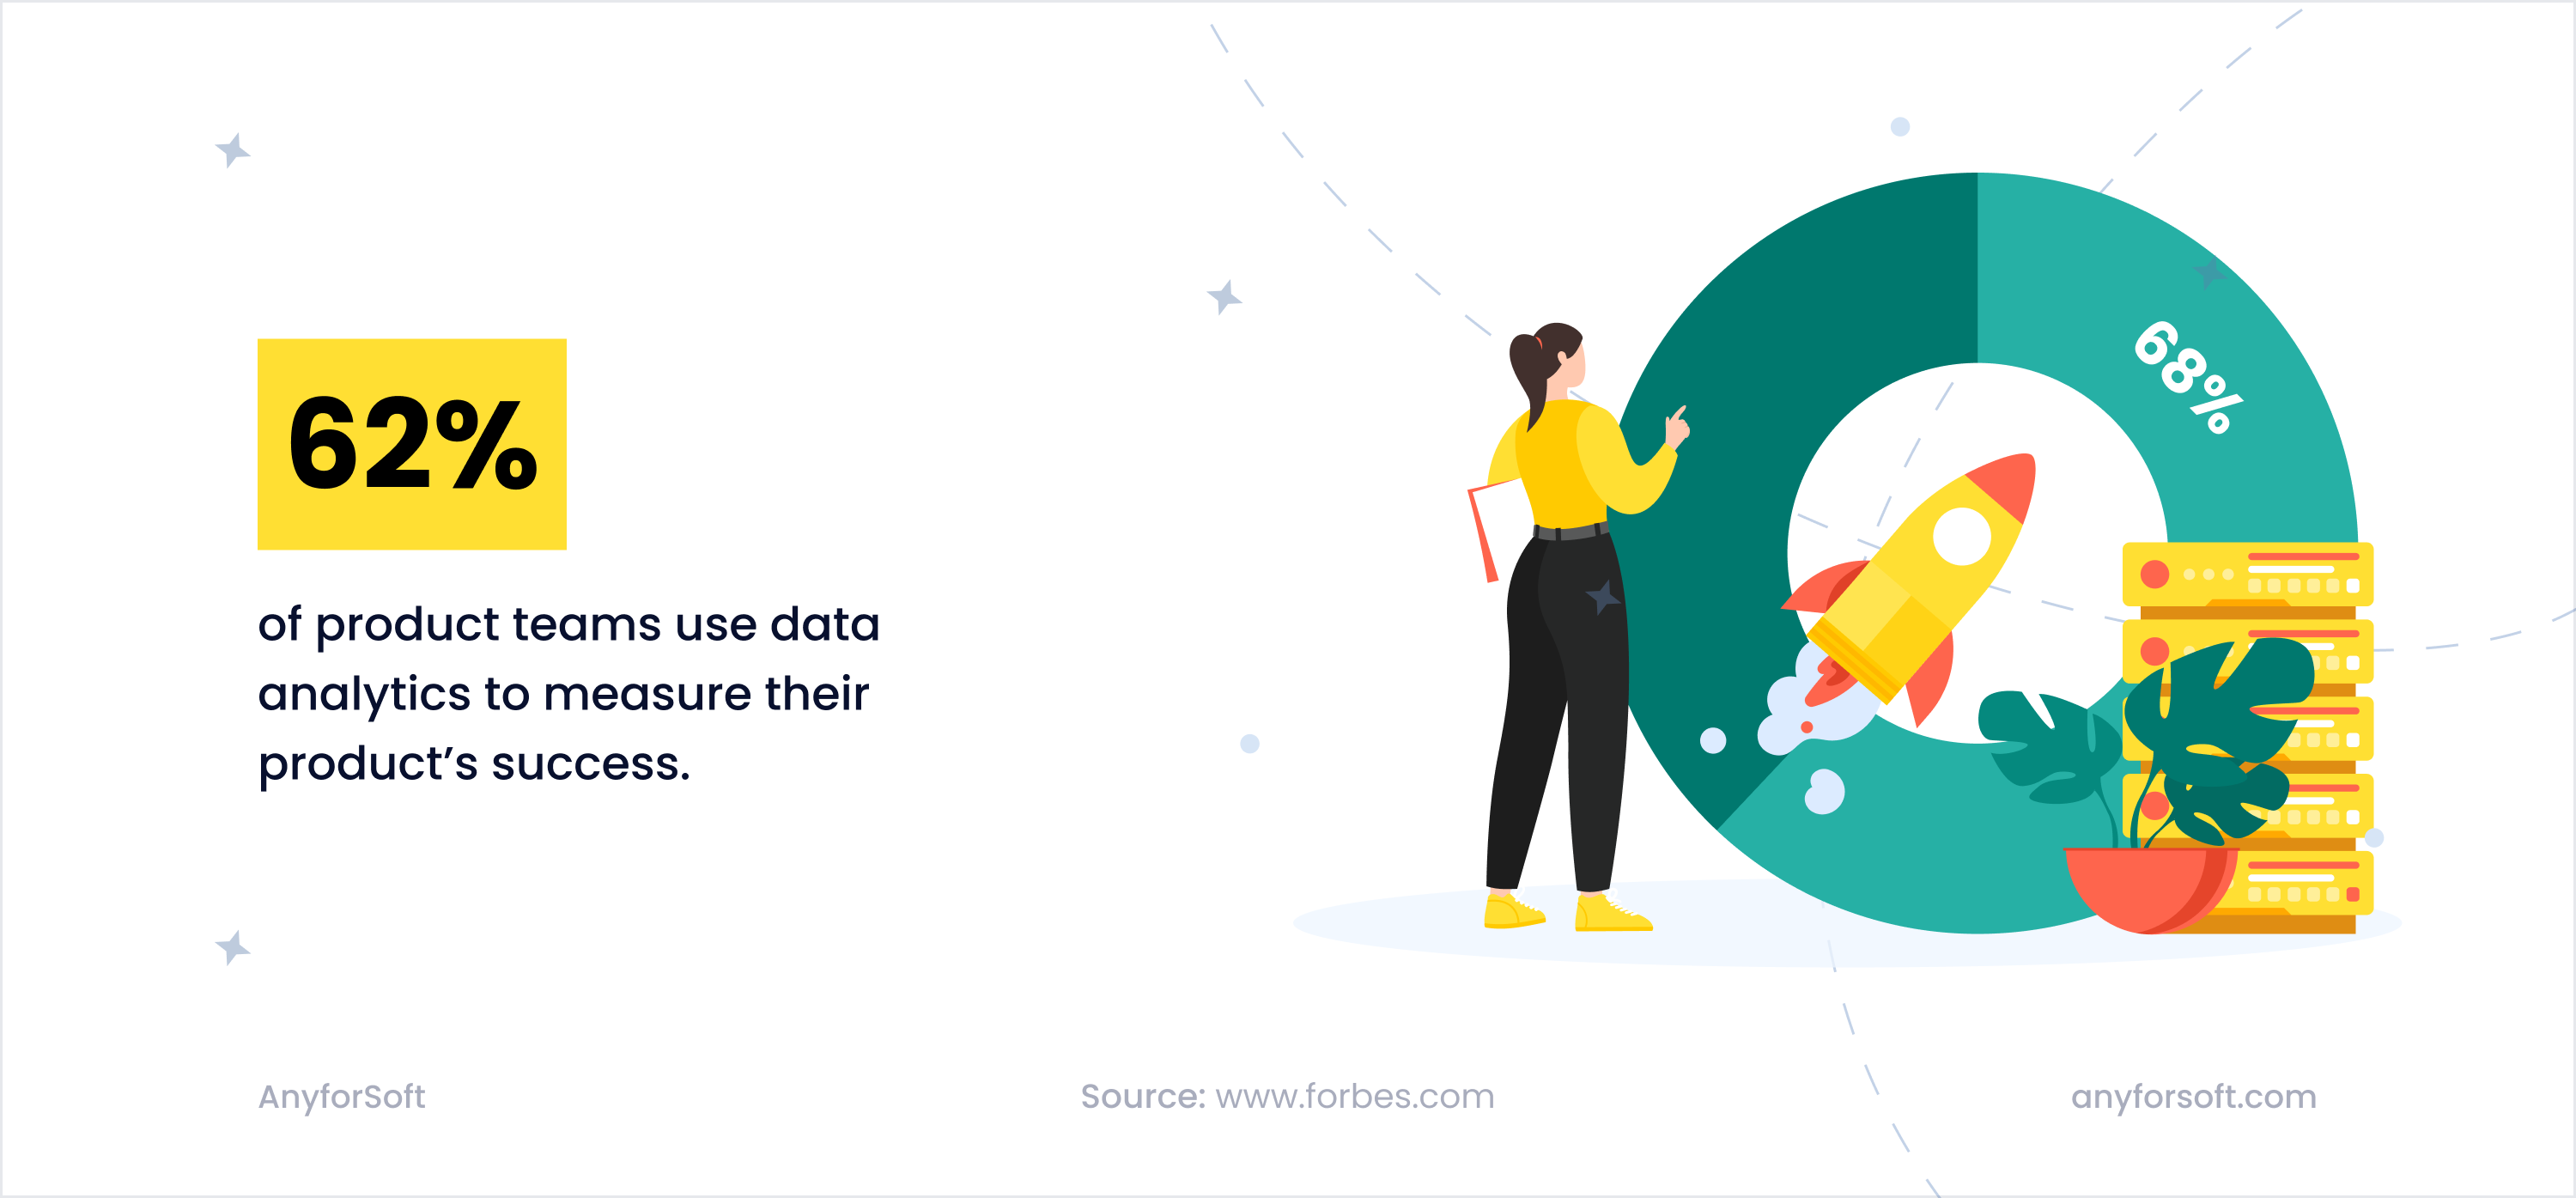 62% of product teams use data analytics